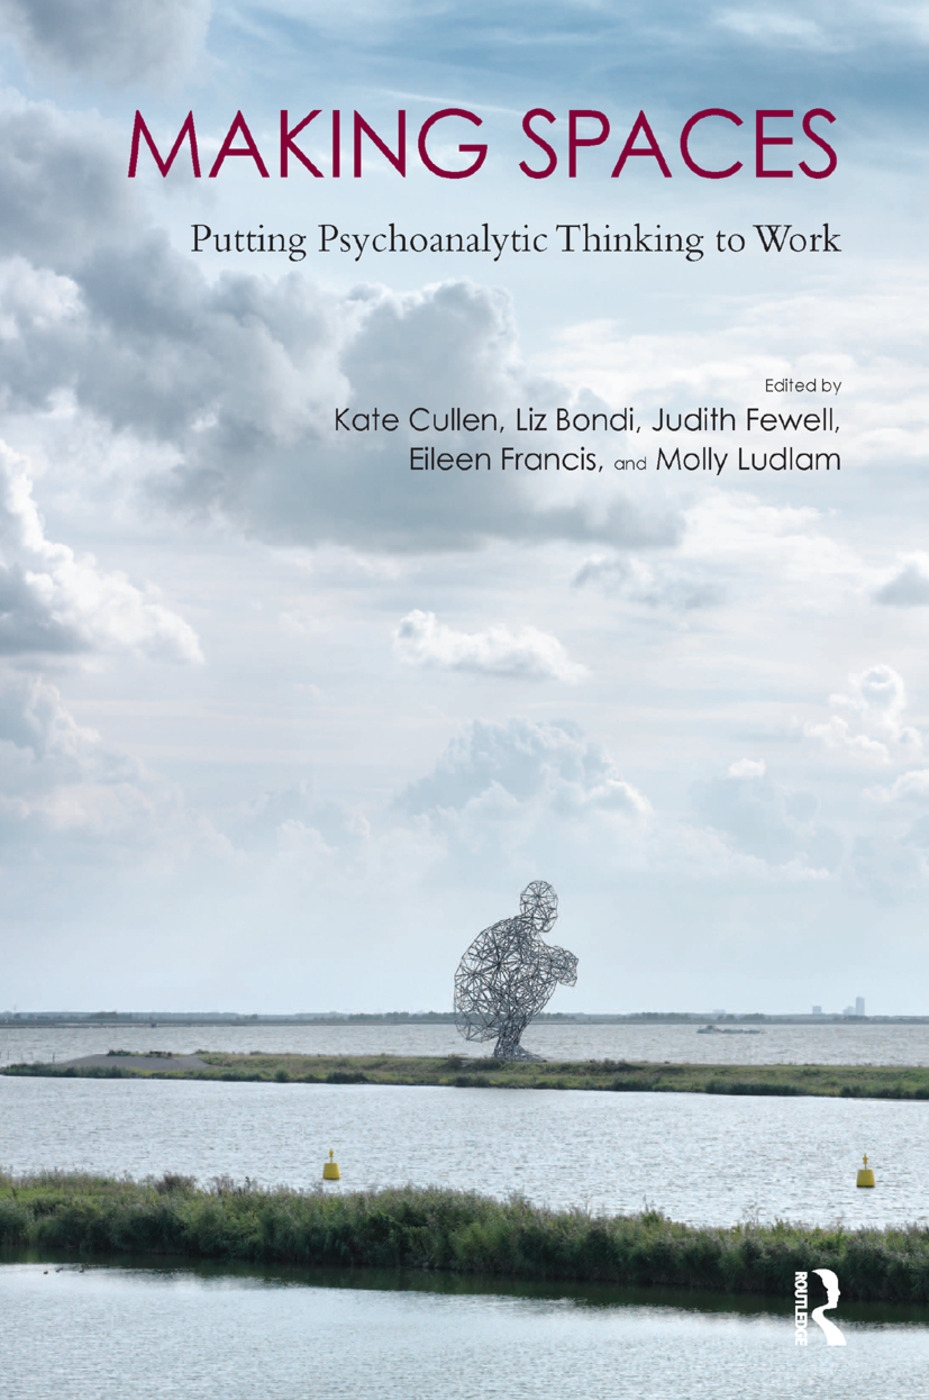 Making Spaces: Putting Psychoanalytic Thinking to Work